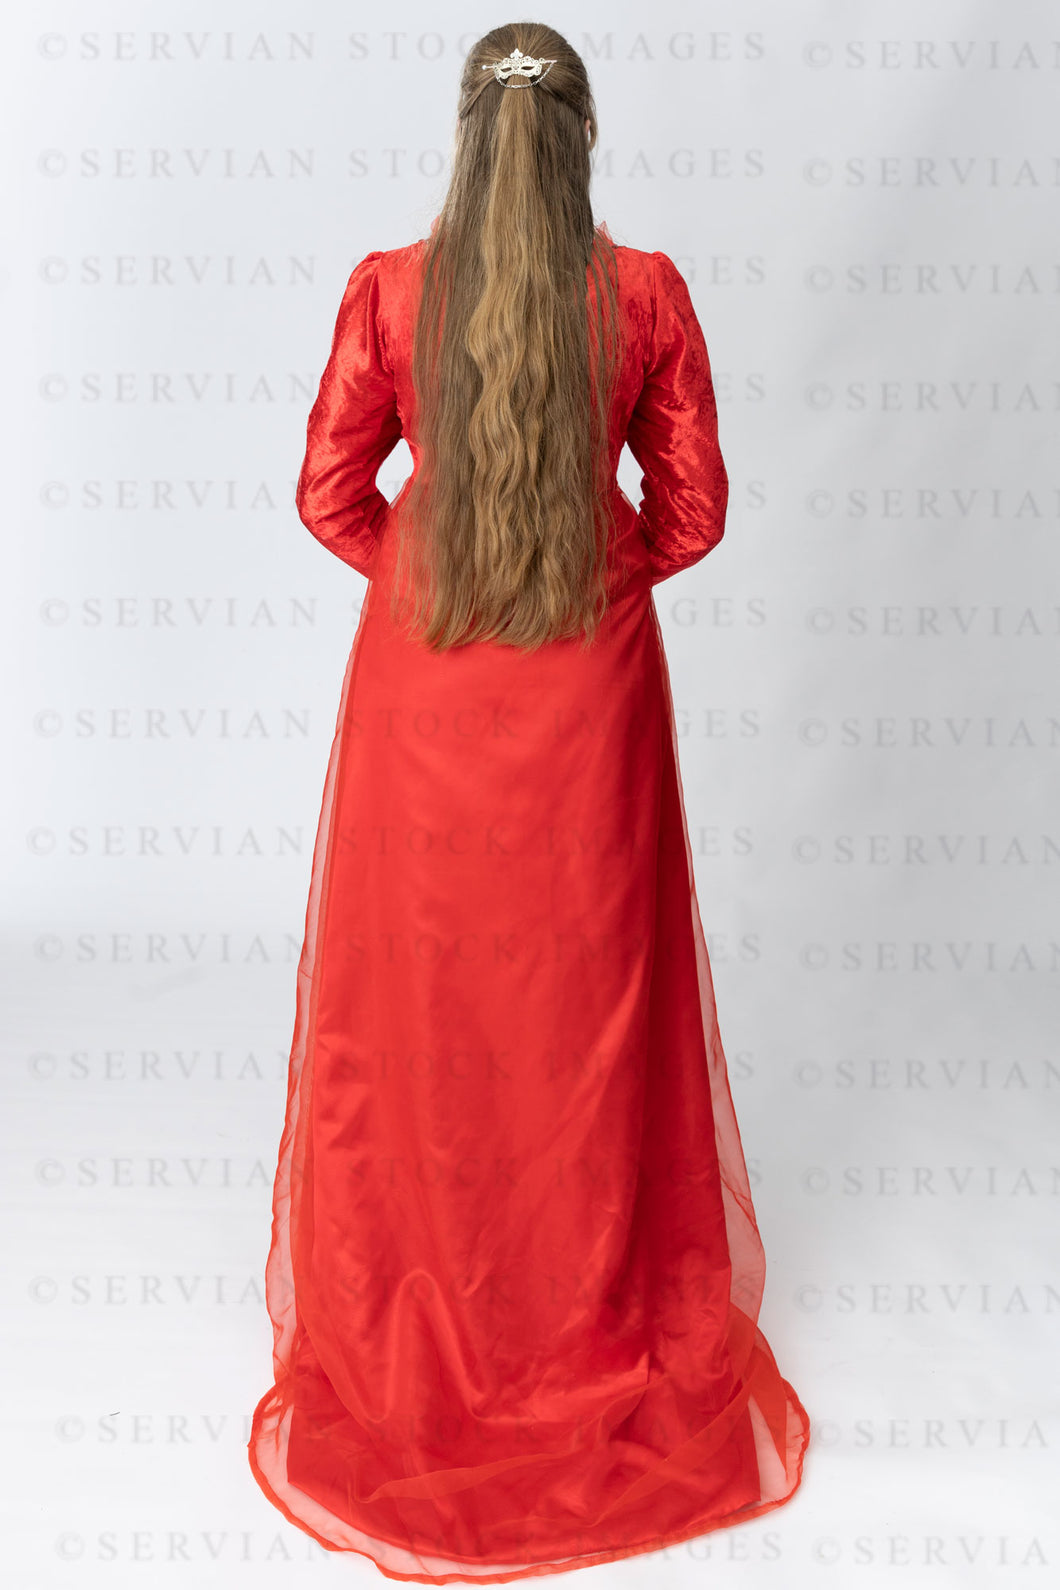 Medieval or High fantasy woman with long hair shown from back view (Katherine5054)